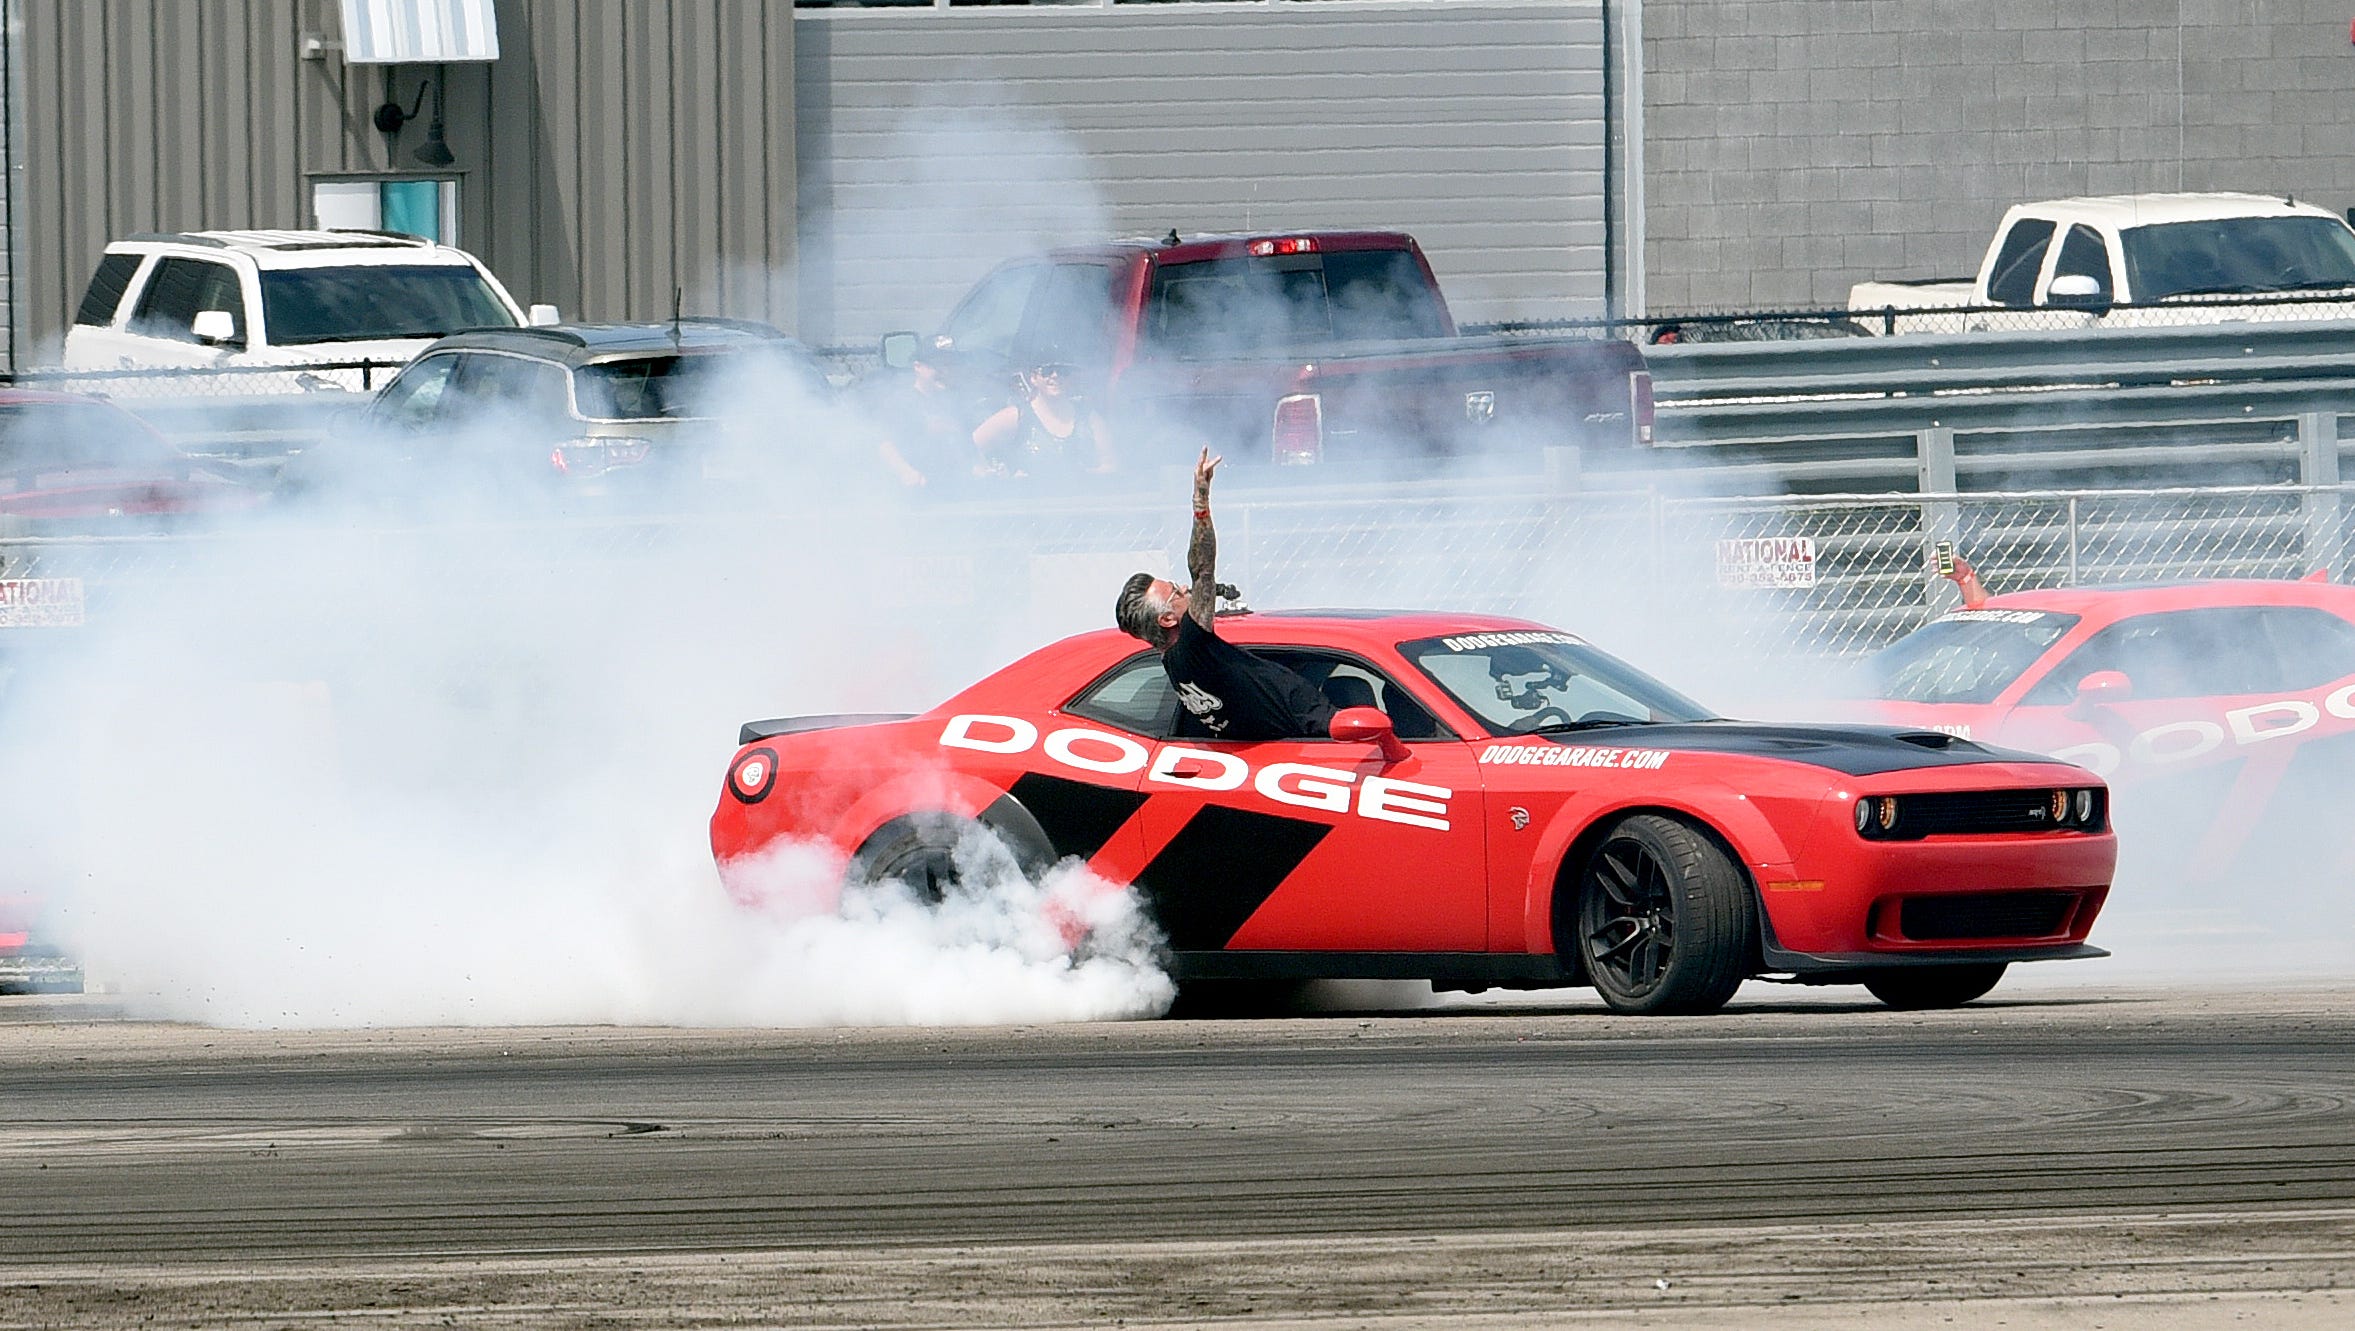 A passenger celebrates with a fist pump as the a Dodge Challenger hellcat performs a burnout at the Dodge drift rides demonstration.